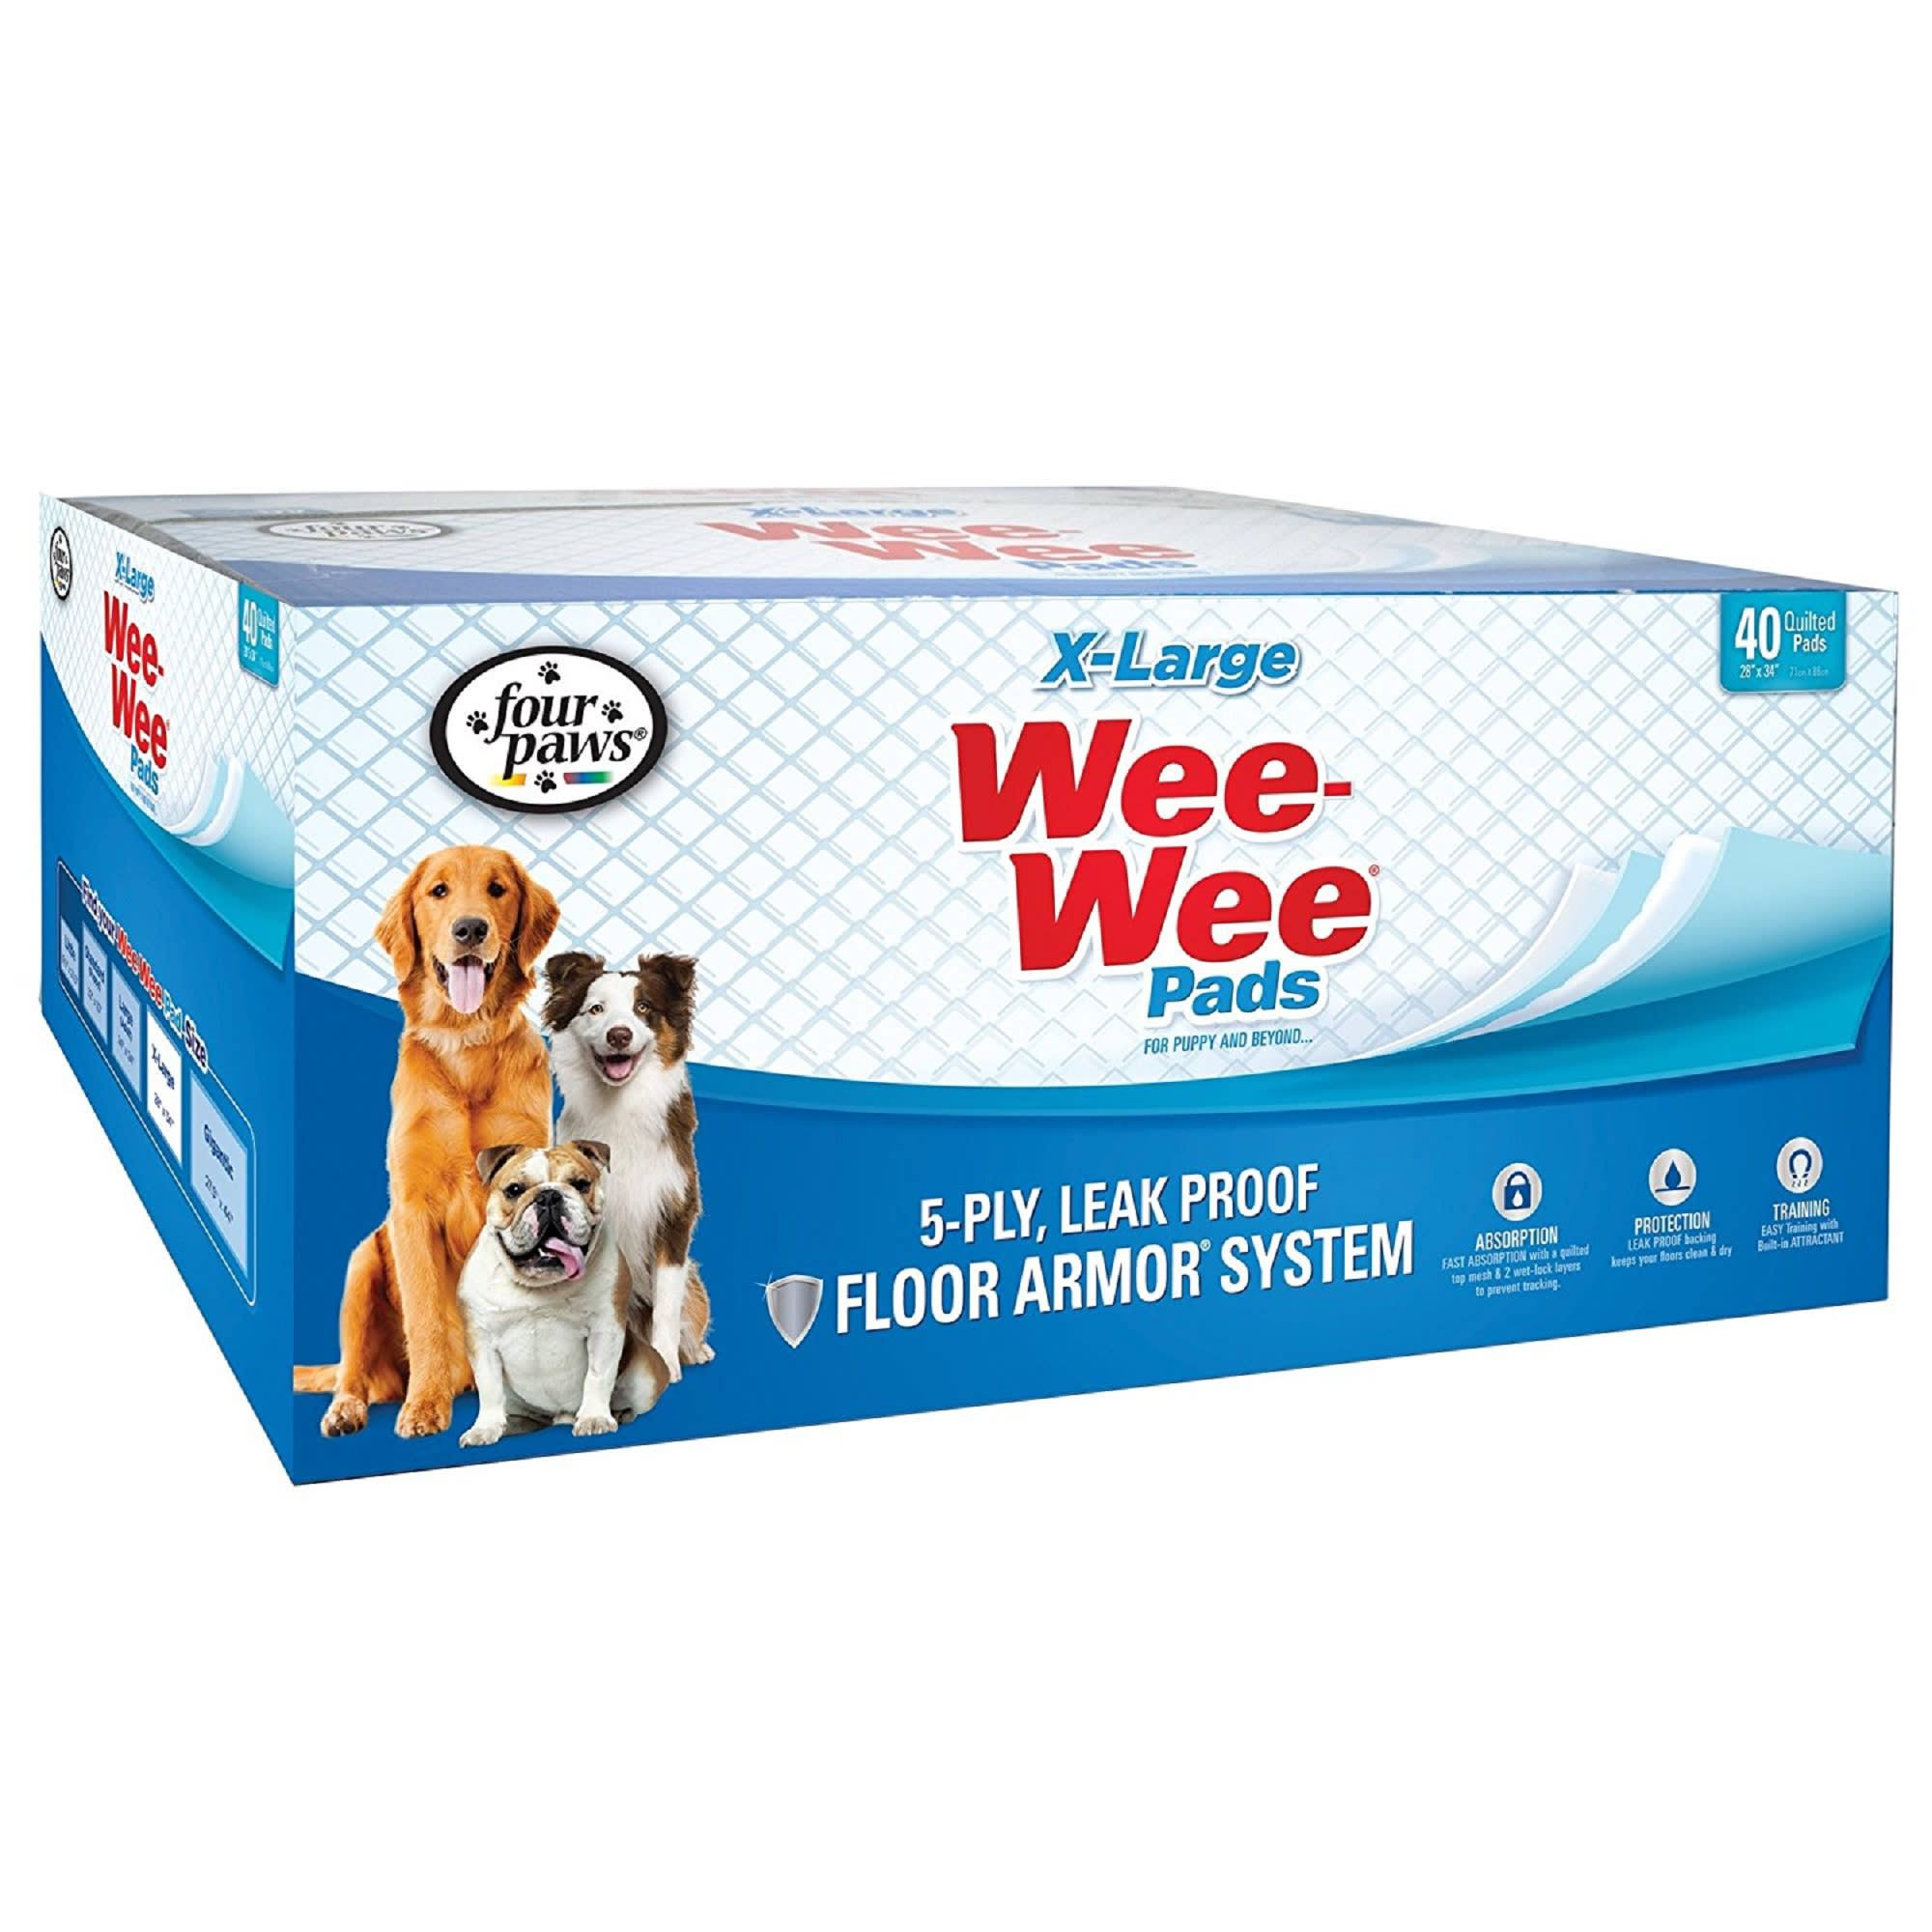 Wee-Wee Puppy Training Pee Pads 40-Count 28" x 34" X-Large Size Pads for Dogs